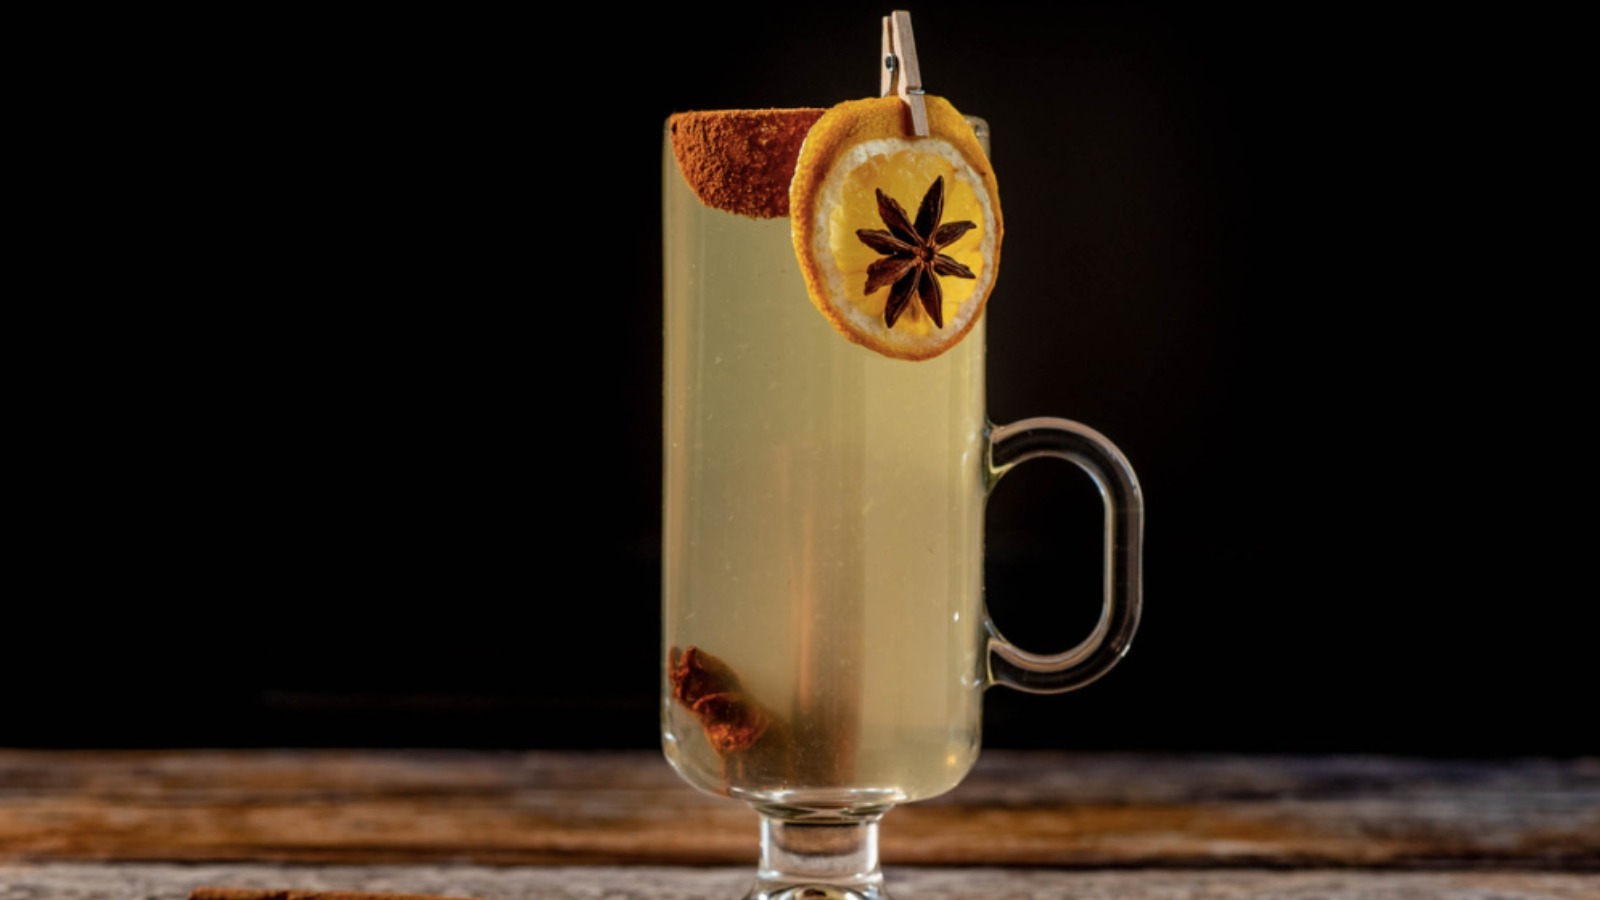 https://www.mashed.com/img/gallery/classic-hot-toddy-recipe/l-intro-1655132196.jpg